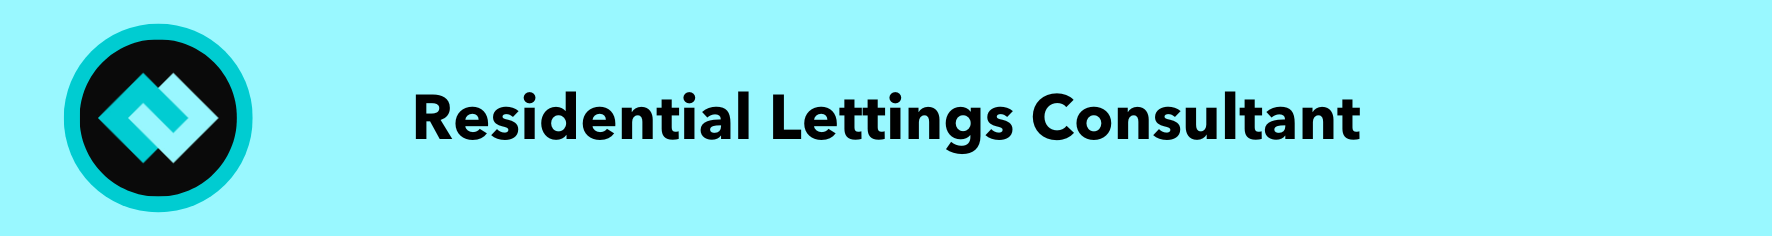 Residential Lettings Consultant